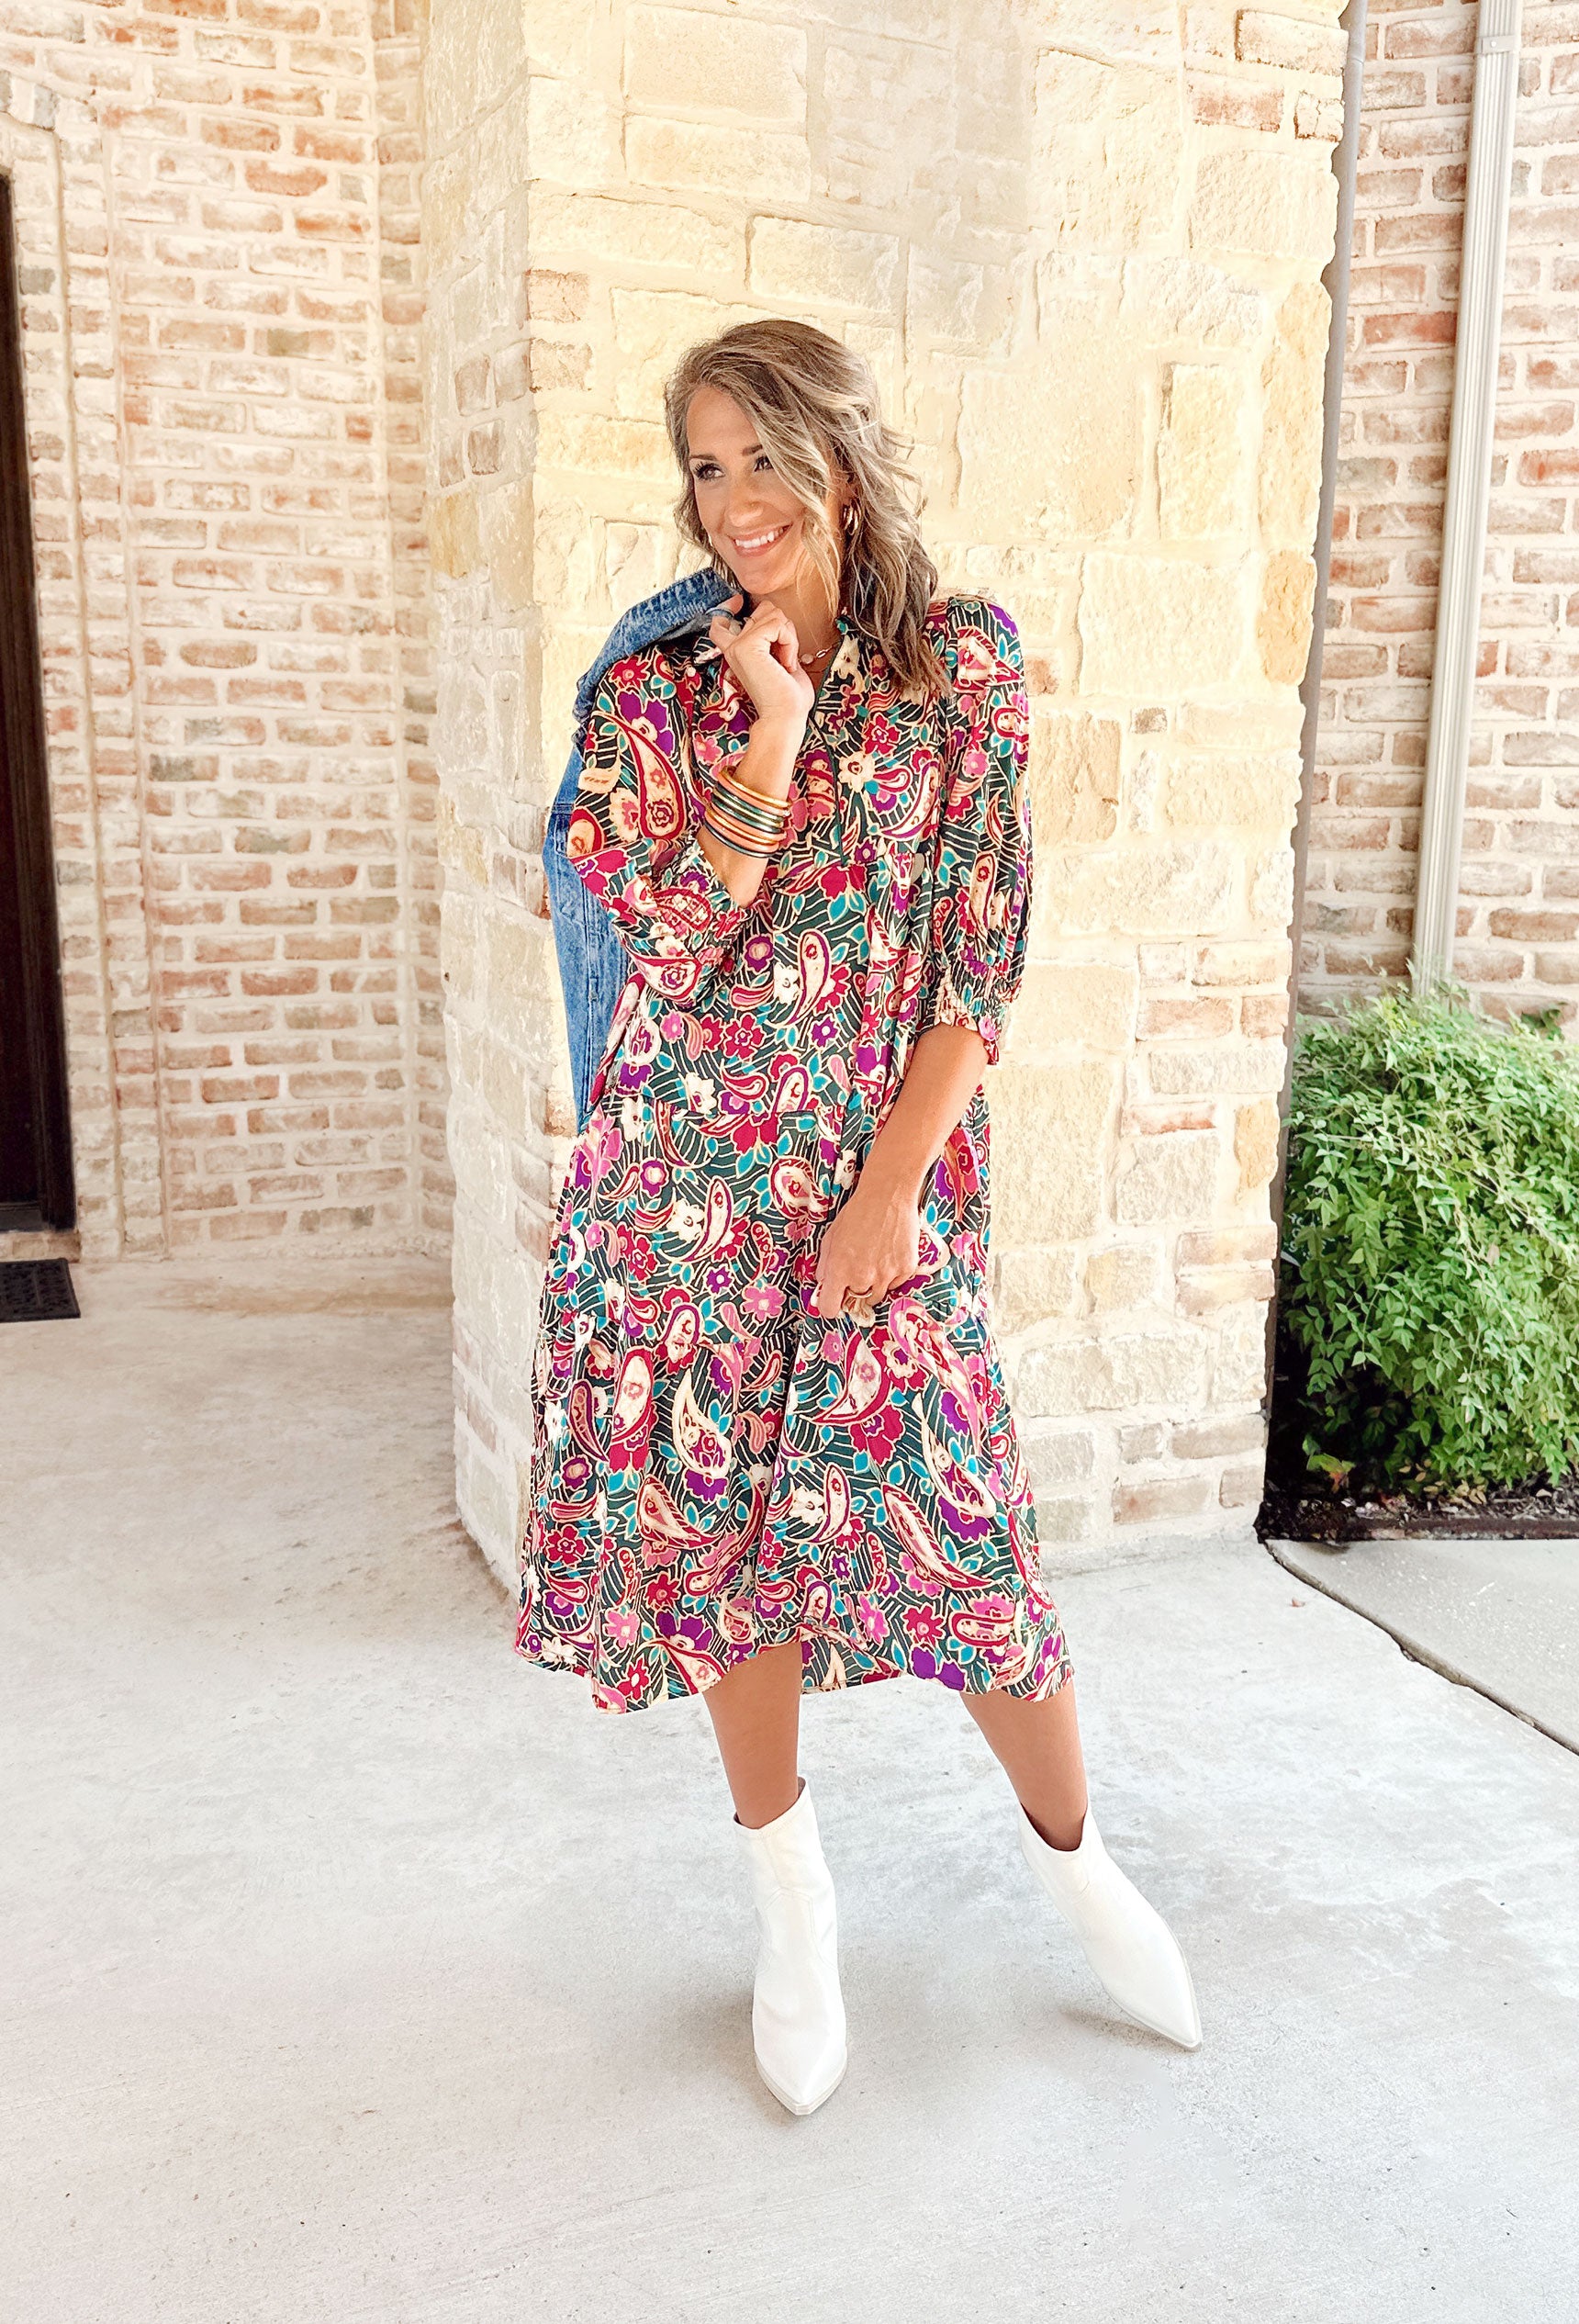 Sonoma Sways Midi Dress, paisley printed midi dress with soft v-neck and quarter length sleeves. Colors are magenta, fuchsia, teal, gold, cranberry, forest green